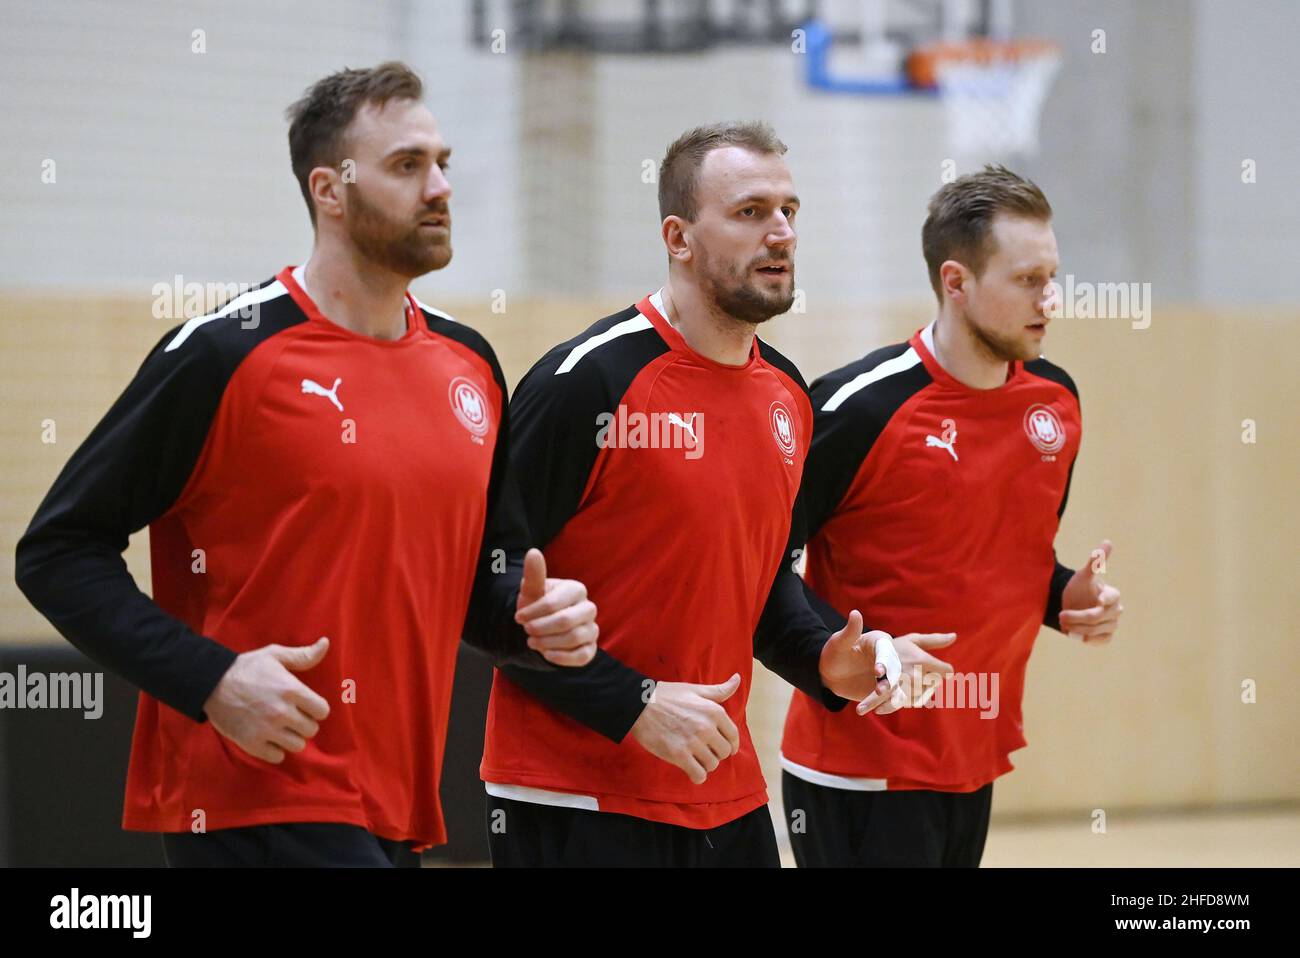 German National Handball Team After High Resolution Stock Photography and  Images - Alamy